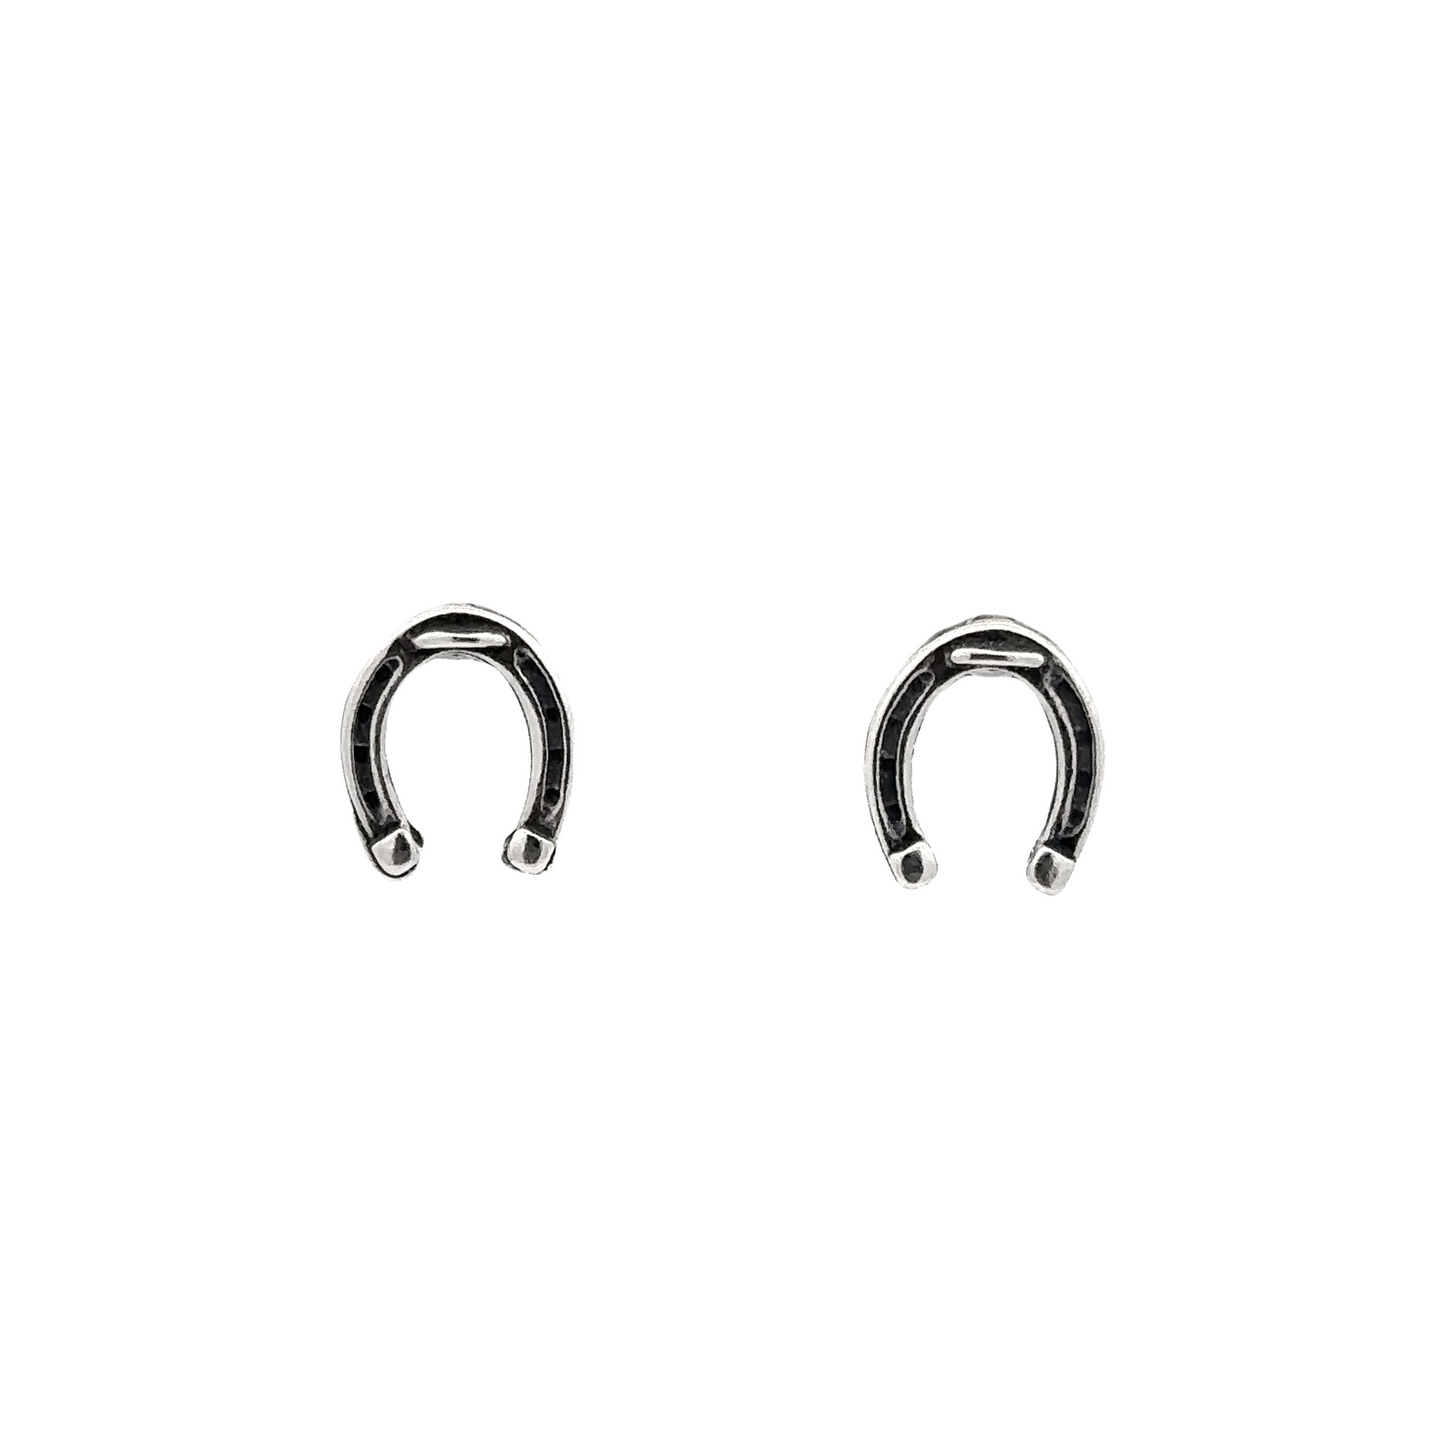 A pair of Horseshoe Studs in .925 Sterling Silver on a white background.